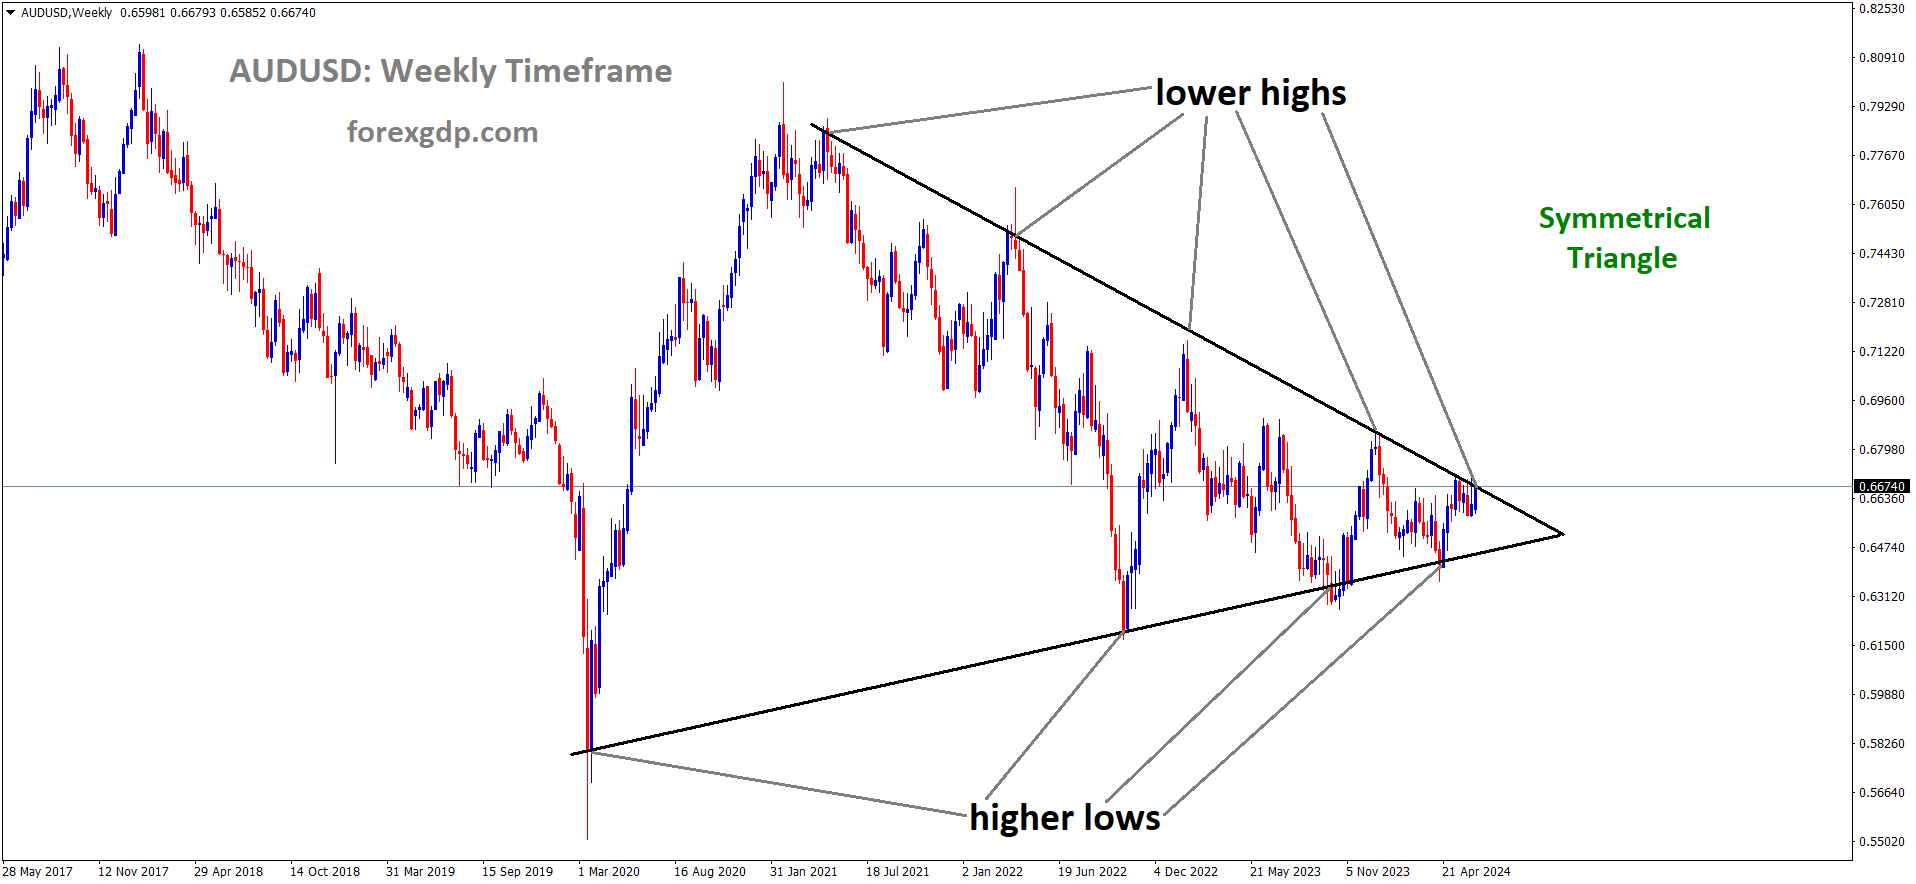 AUDUSD is moving in Symmetrical Triangle and market has reached lower high area of the pattern